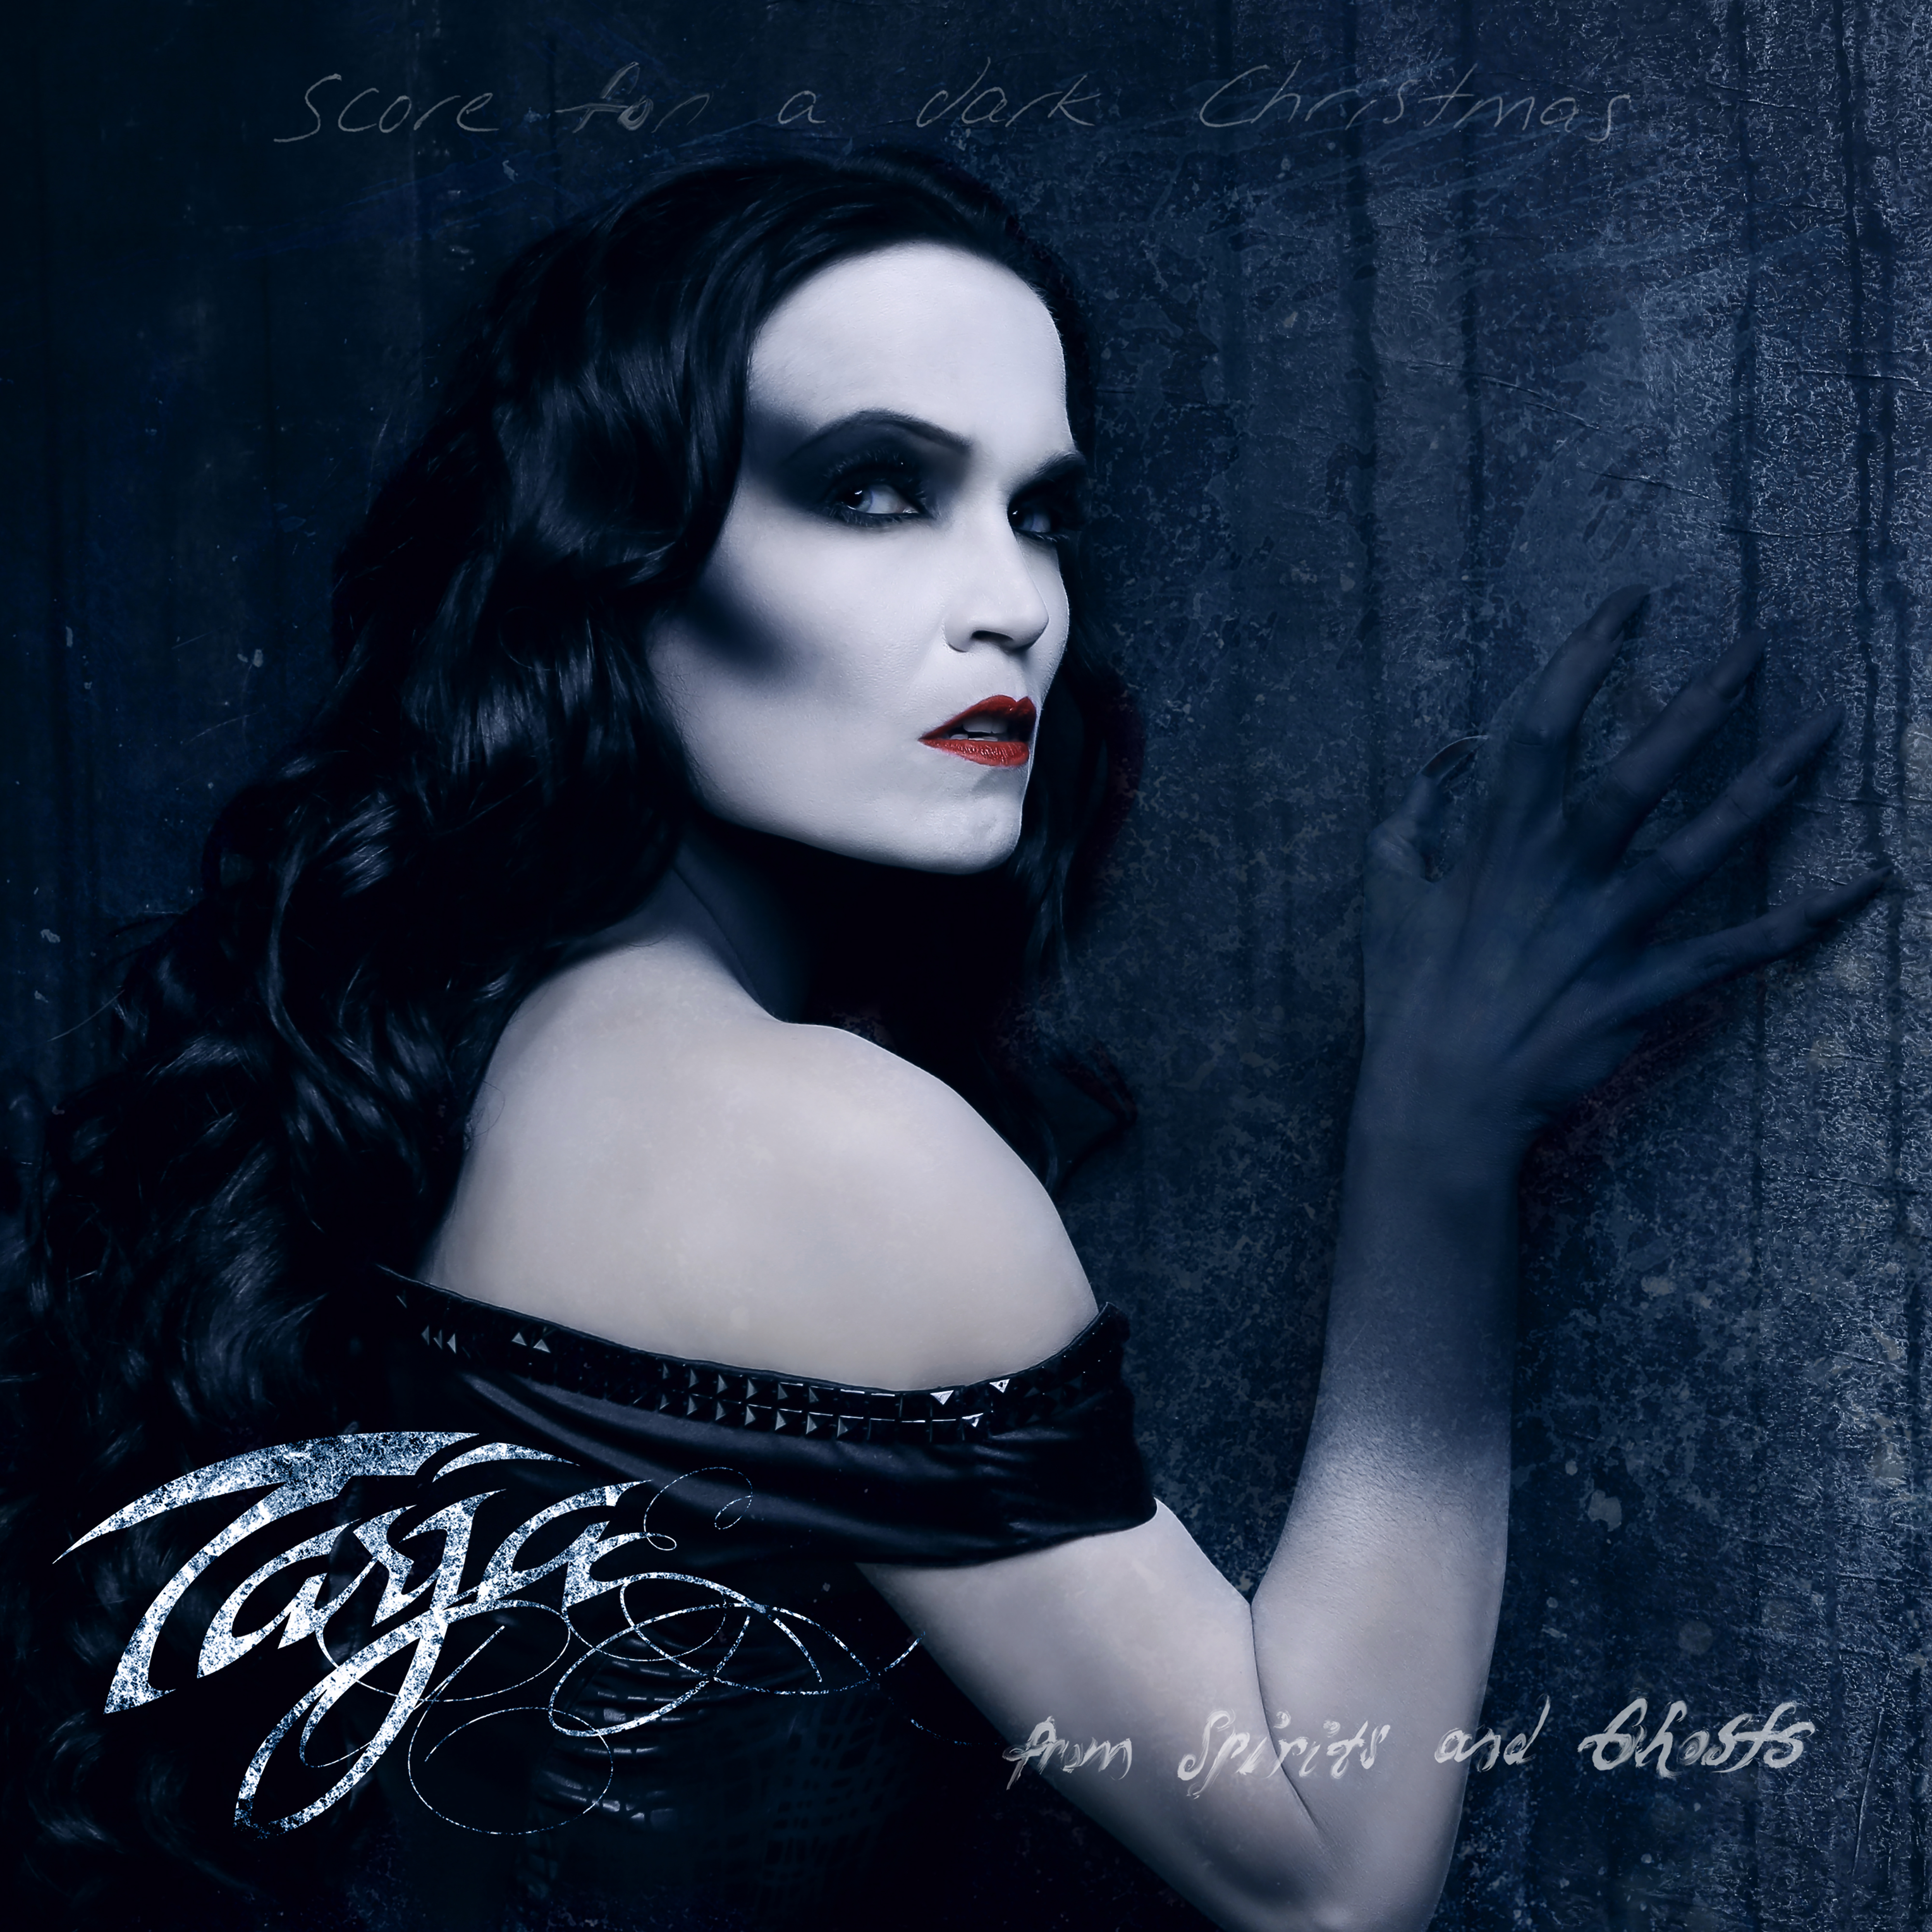 Tarja Turunen - From Spirits and Ghosts (Score For